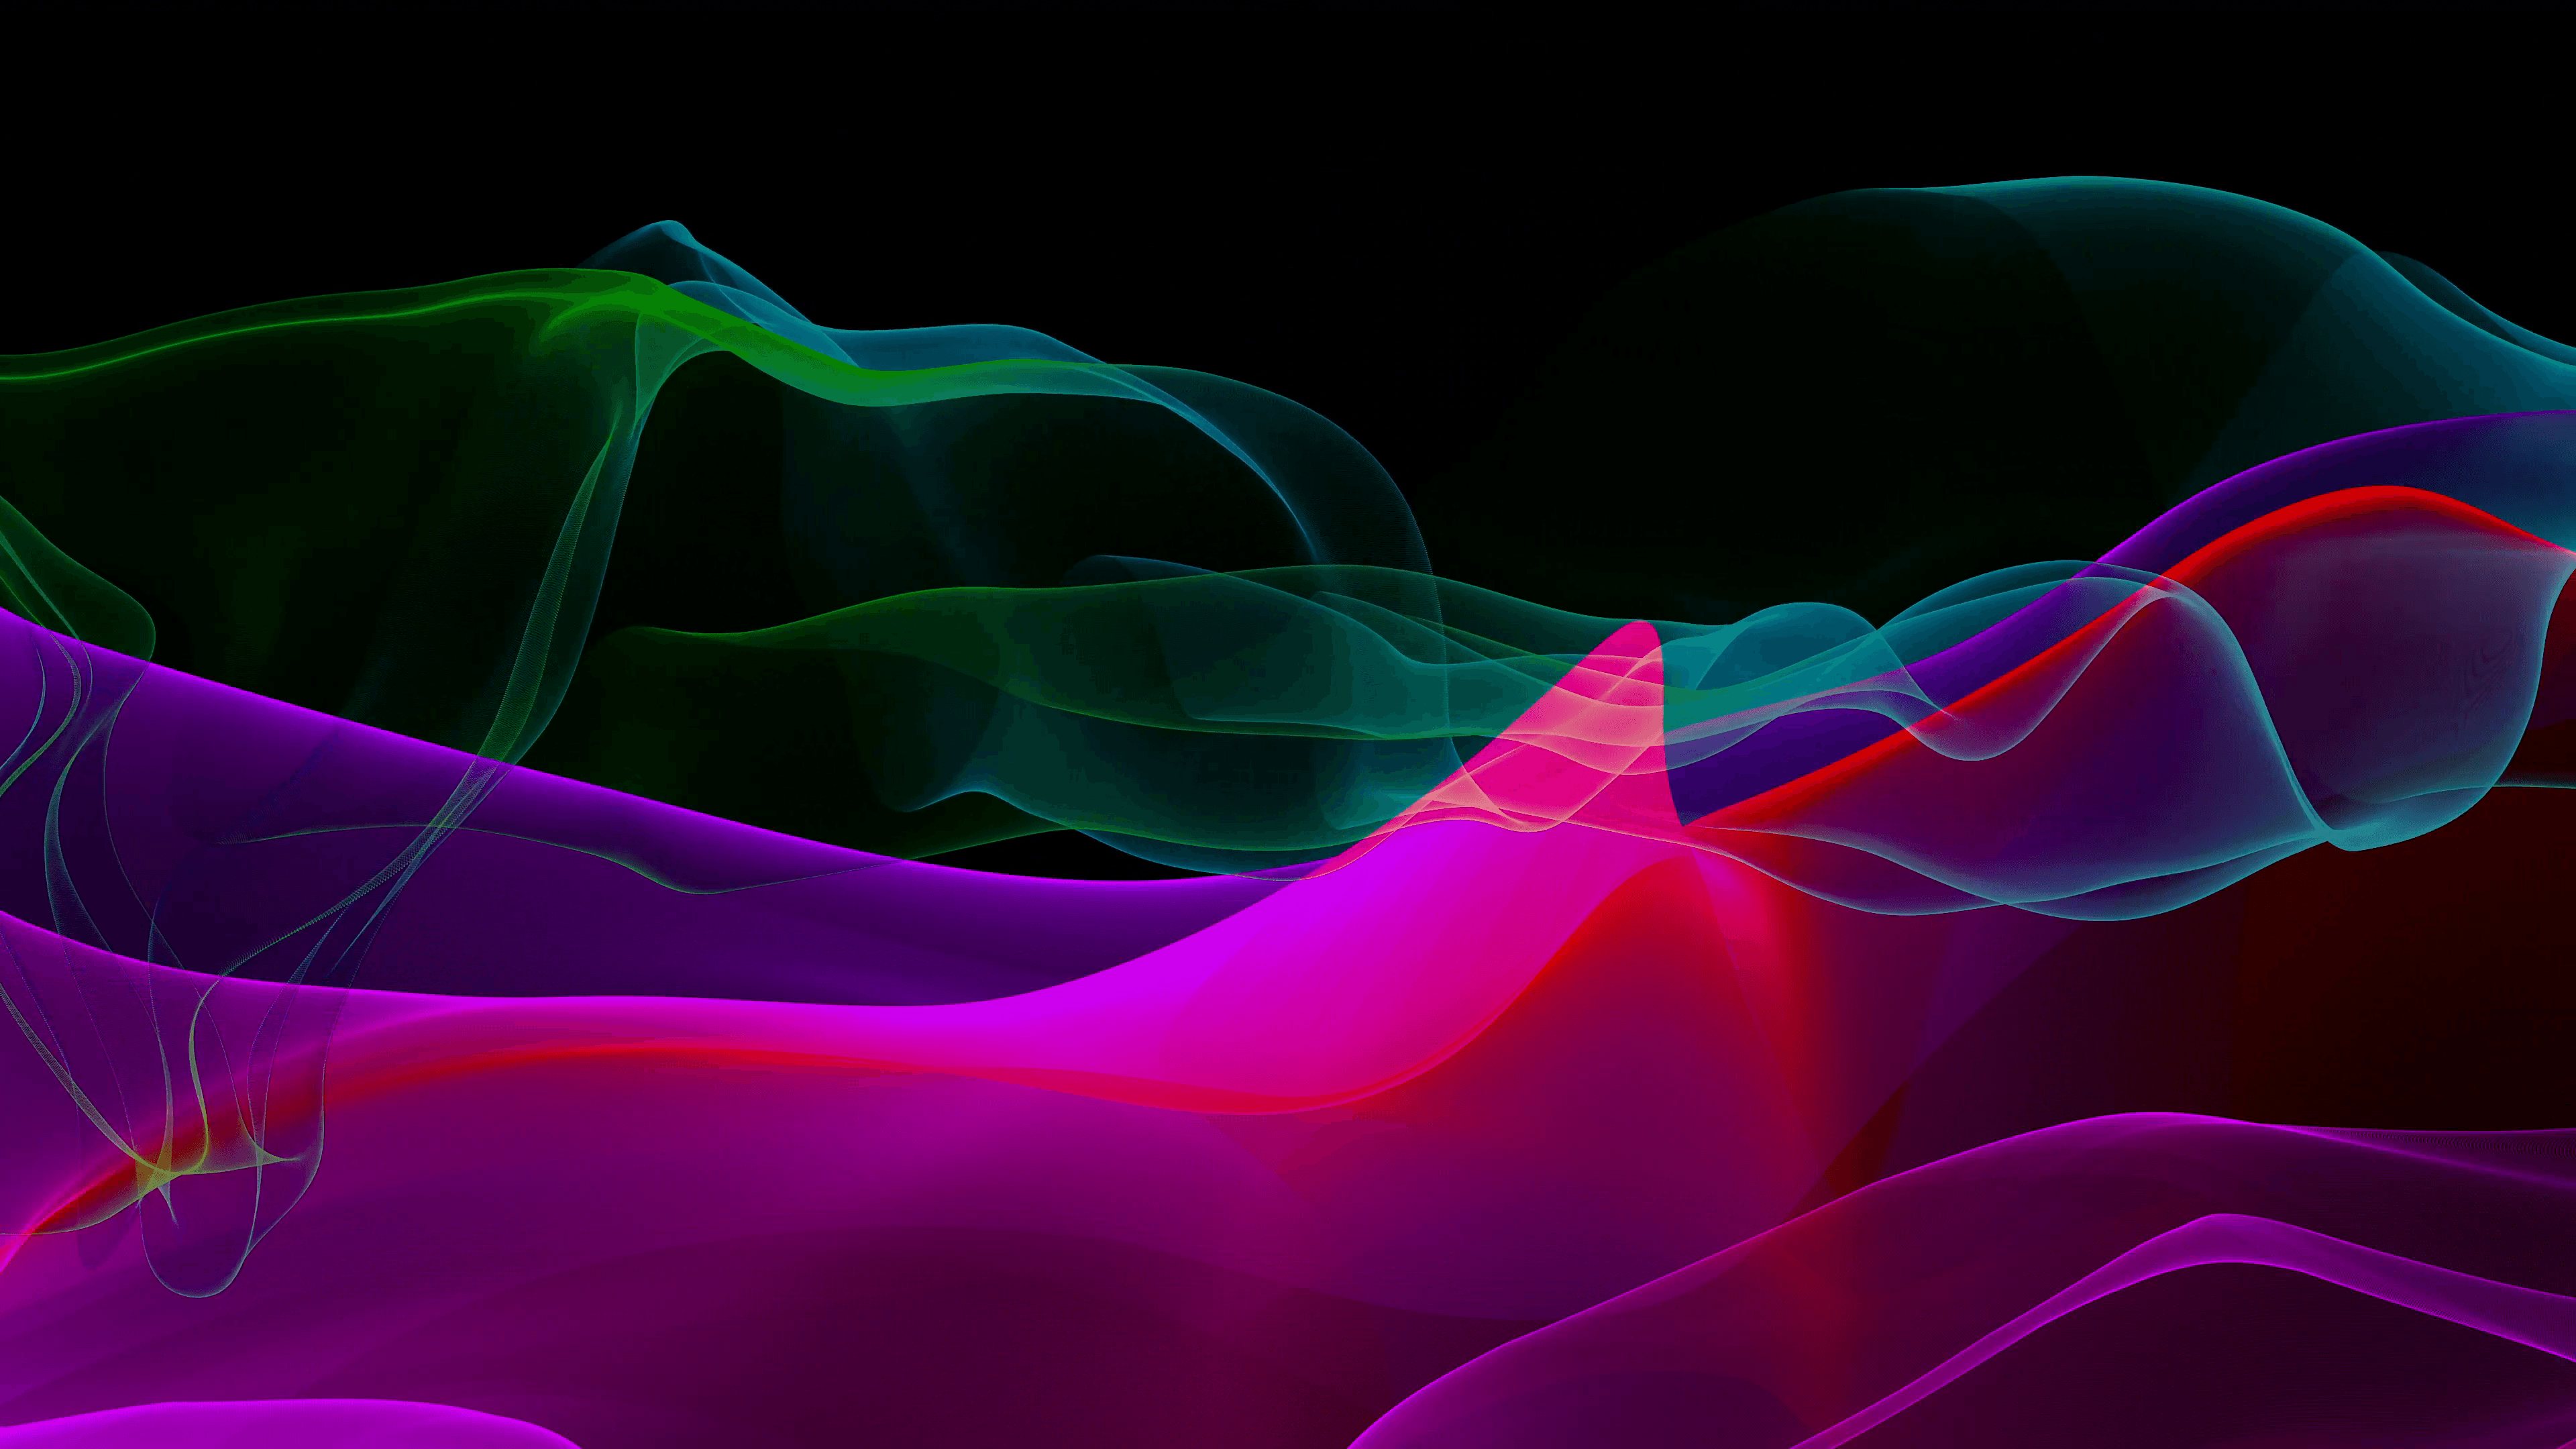 Abstract Wavy Shapes on the dark background. Motion Background